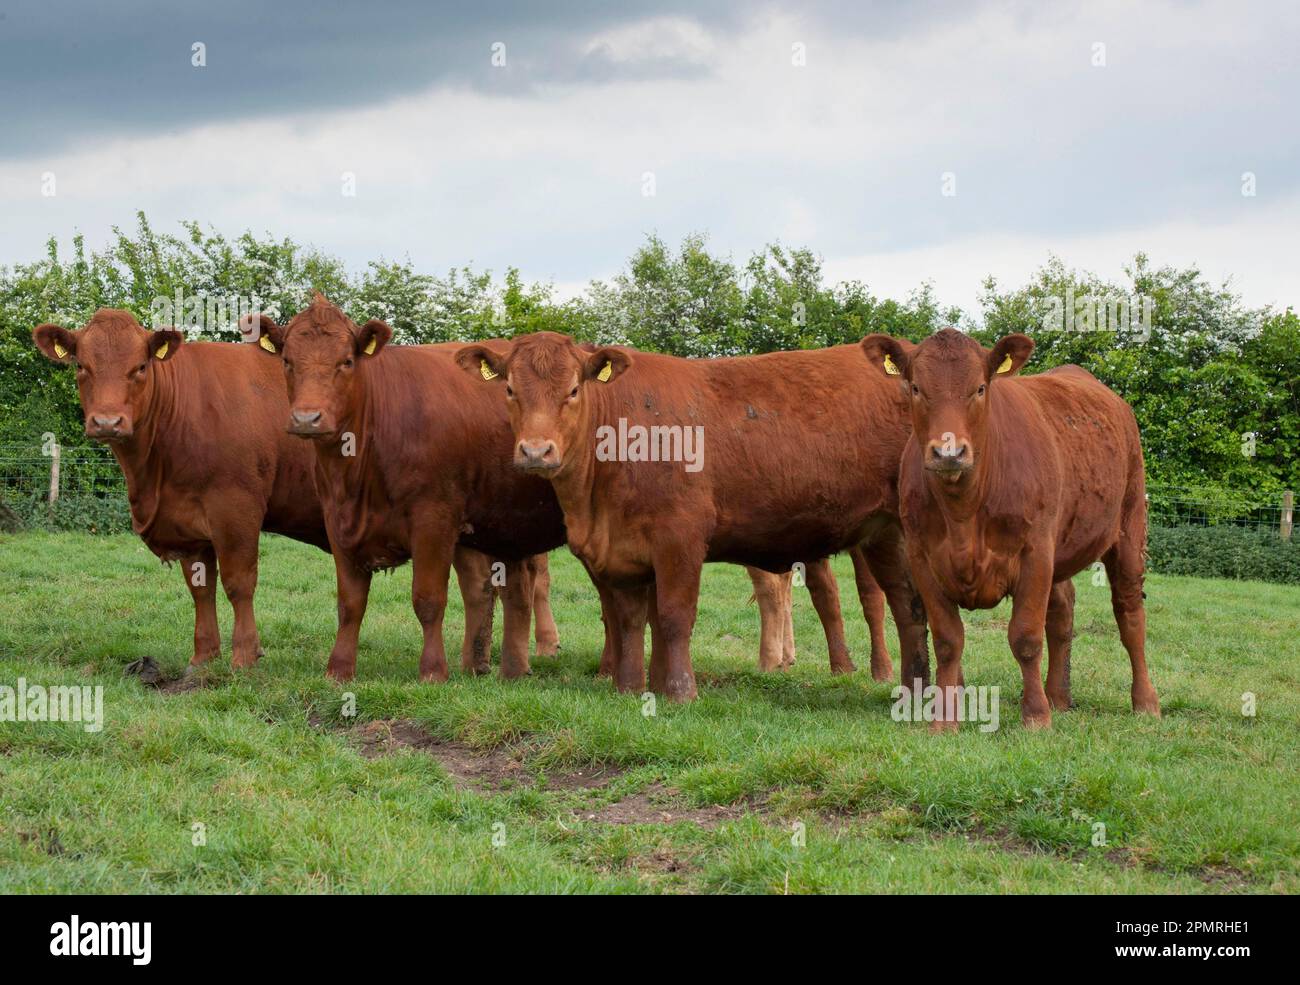 Domestic Cattle, Stabiliser fourteen-month old heifers, herd standing in pasture, Yorkshire, England, United Kingdom Stock Photo